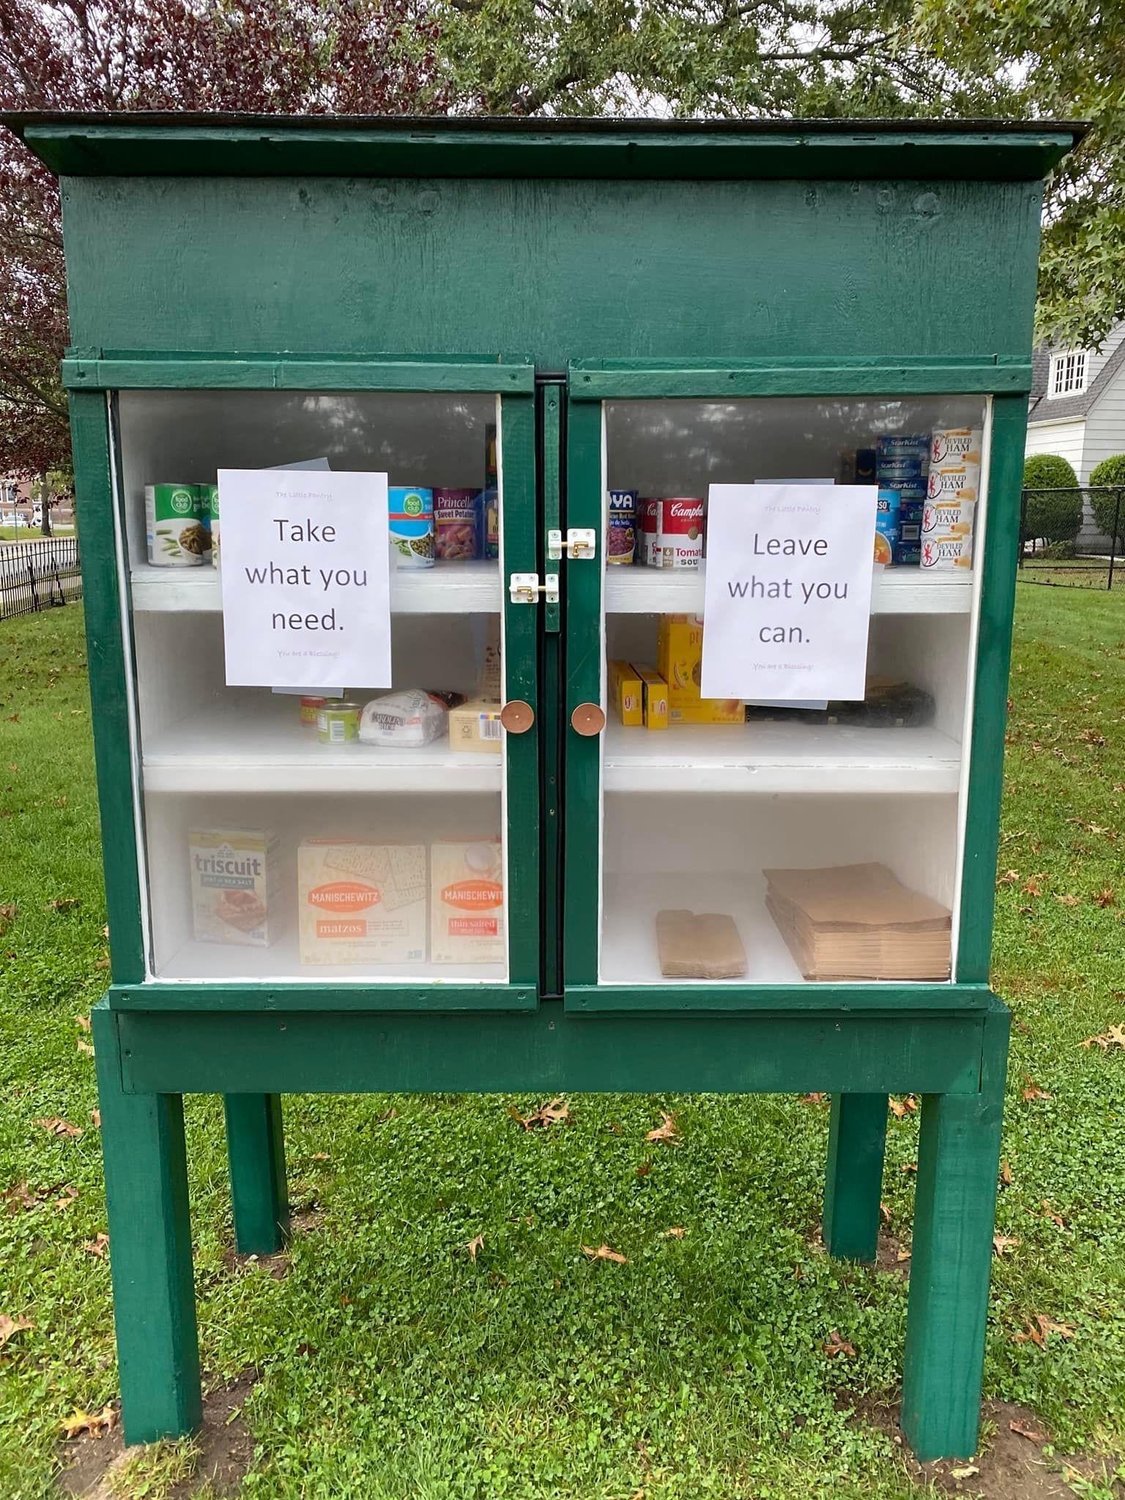 Trinity St. John’s Episcopal Church, in Hewlett, is helping those in need with its Little Pantry and the take-one-leave-one approach.